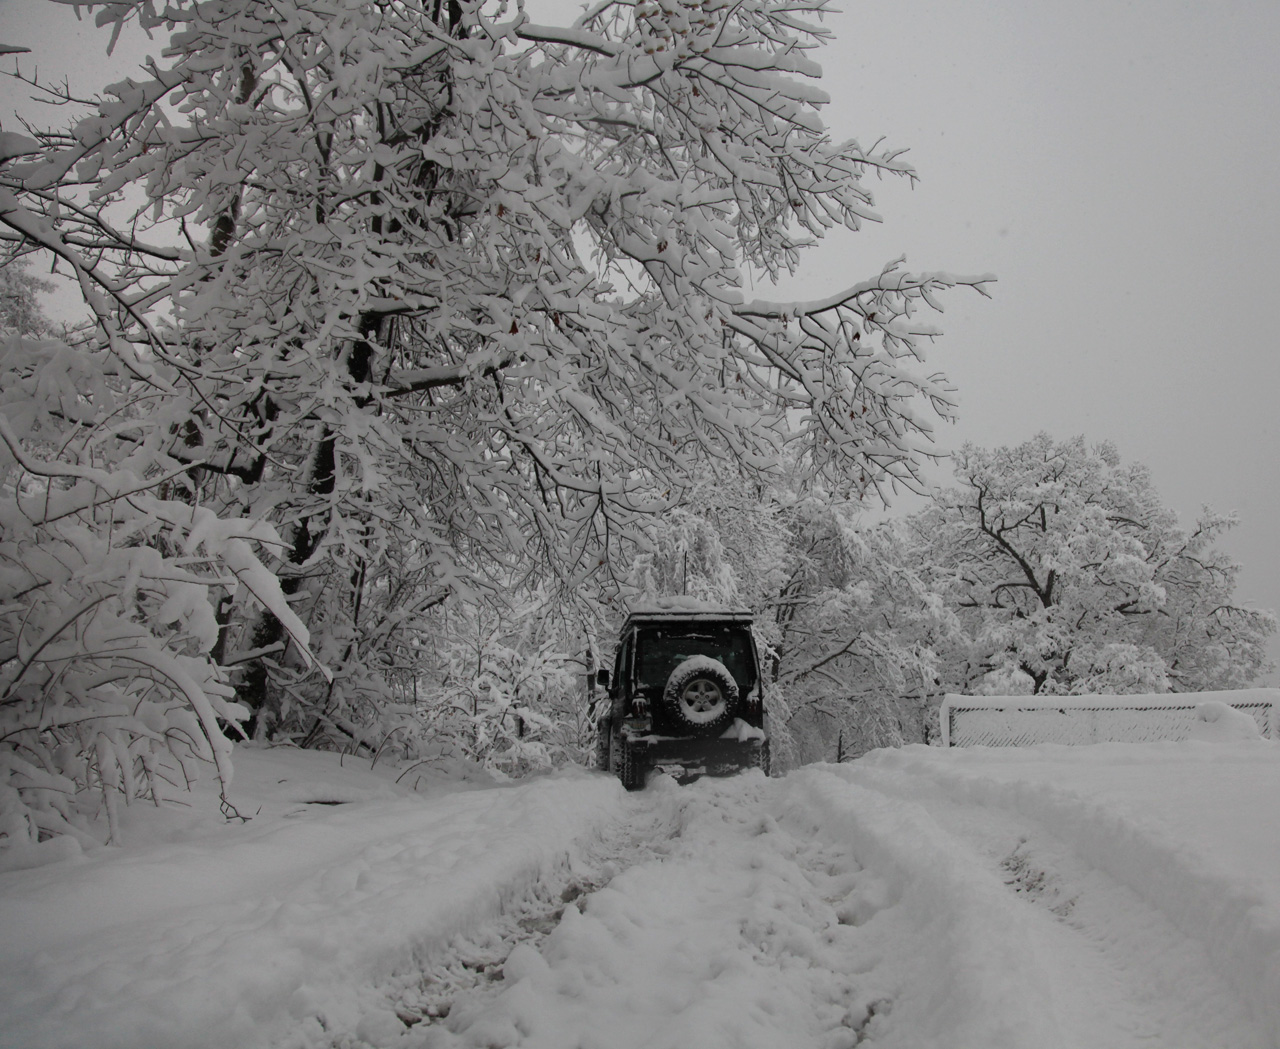 Click to Enlarge - Jeep on Morgan's Run Road